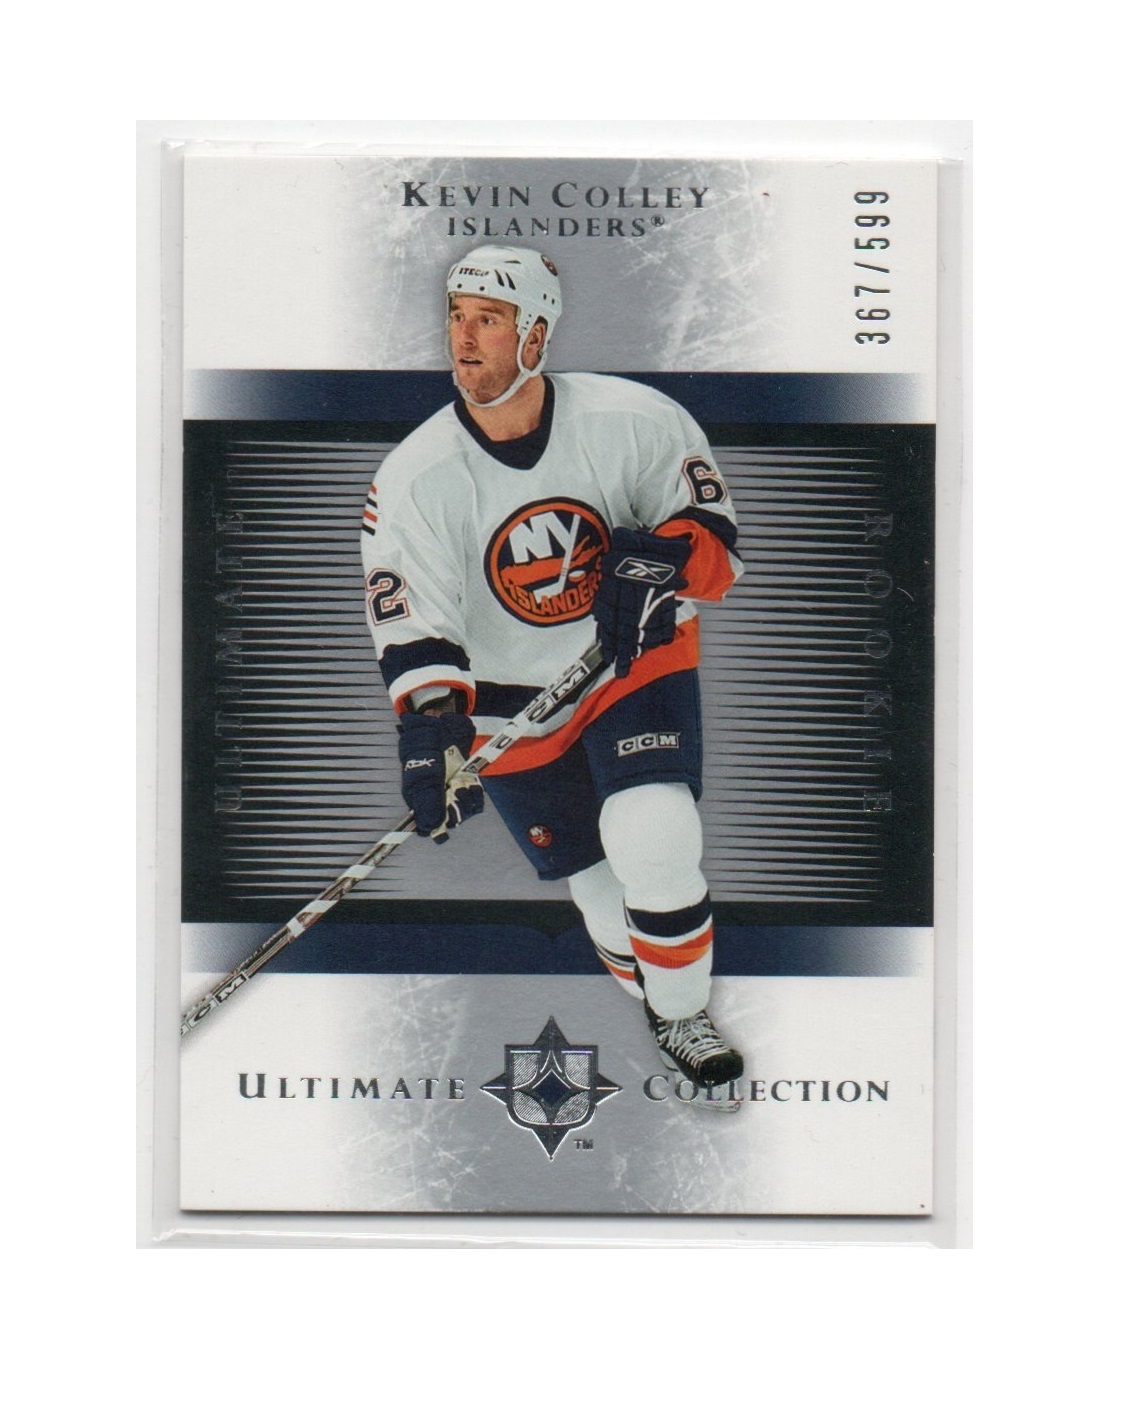 2005-06 Ultimate Collection #156 Kevin Colley RC (30-X265-ISLANDERS)